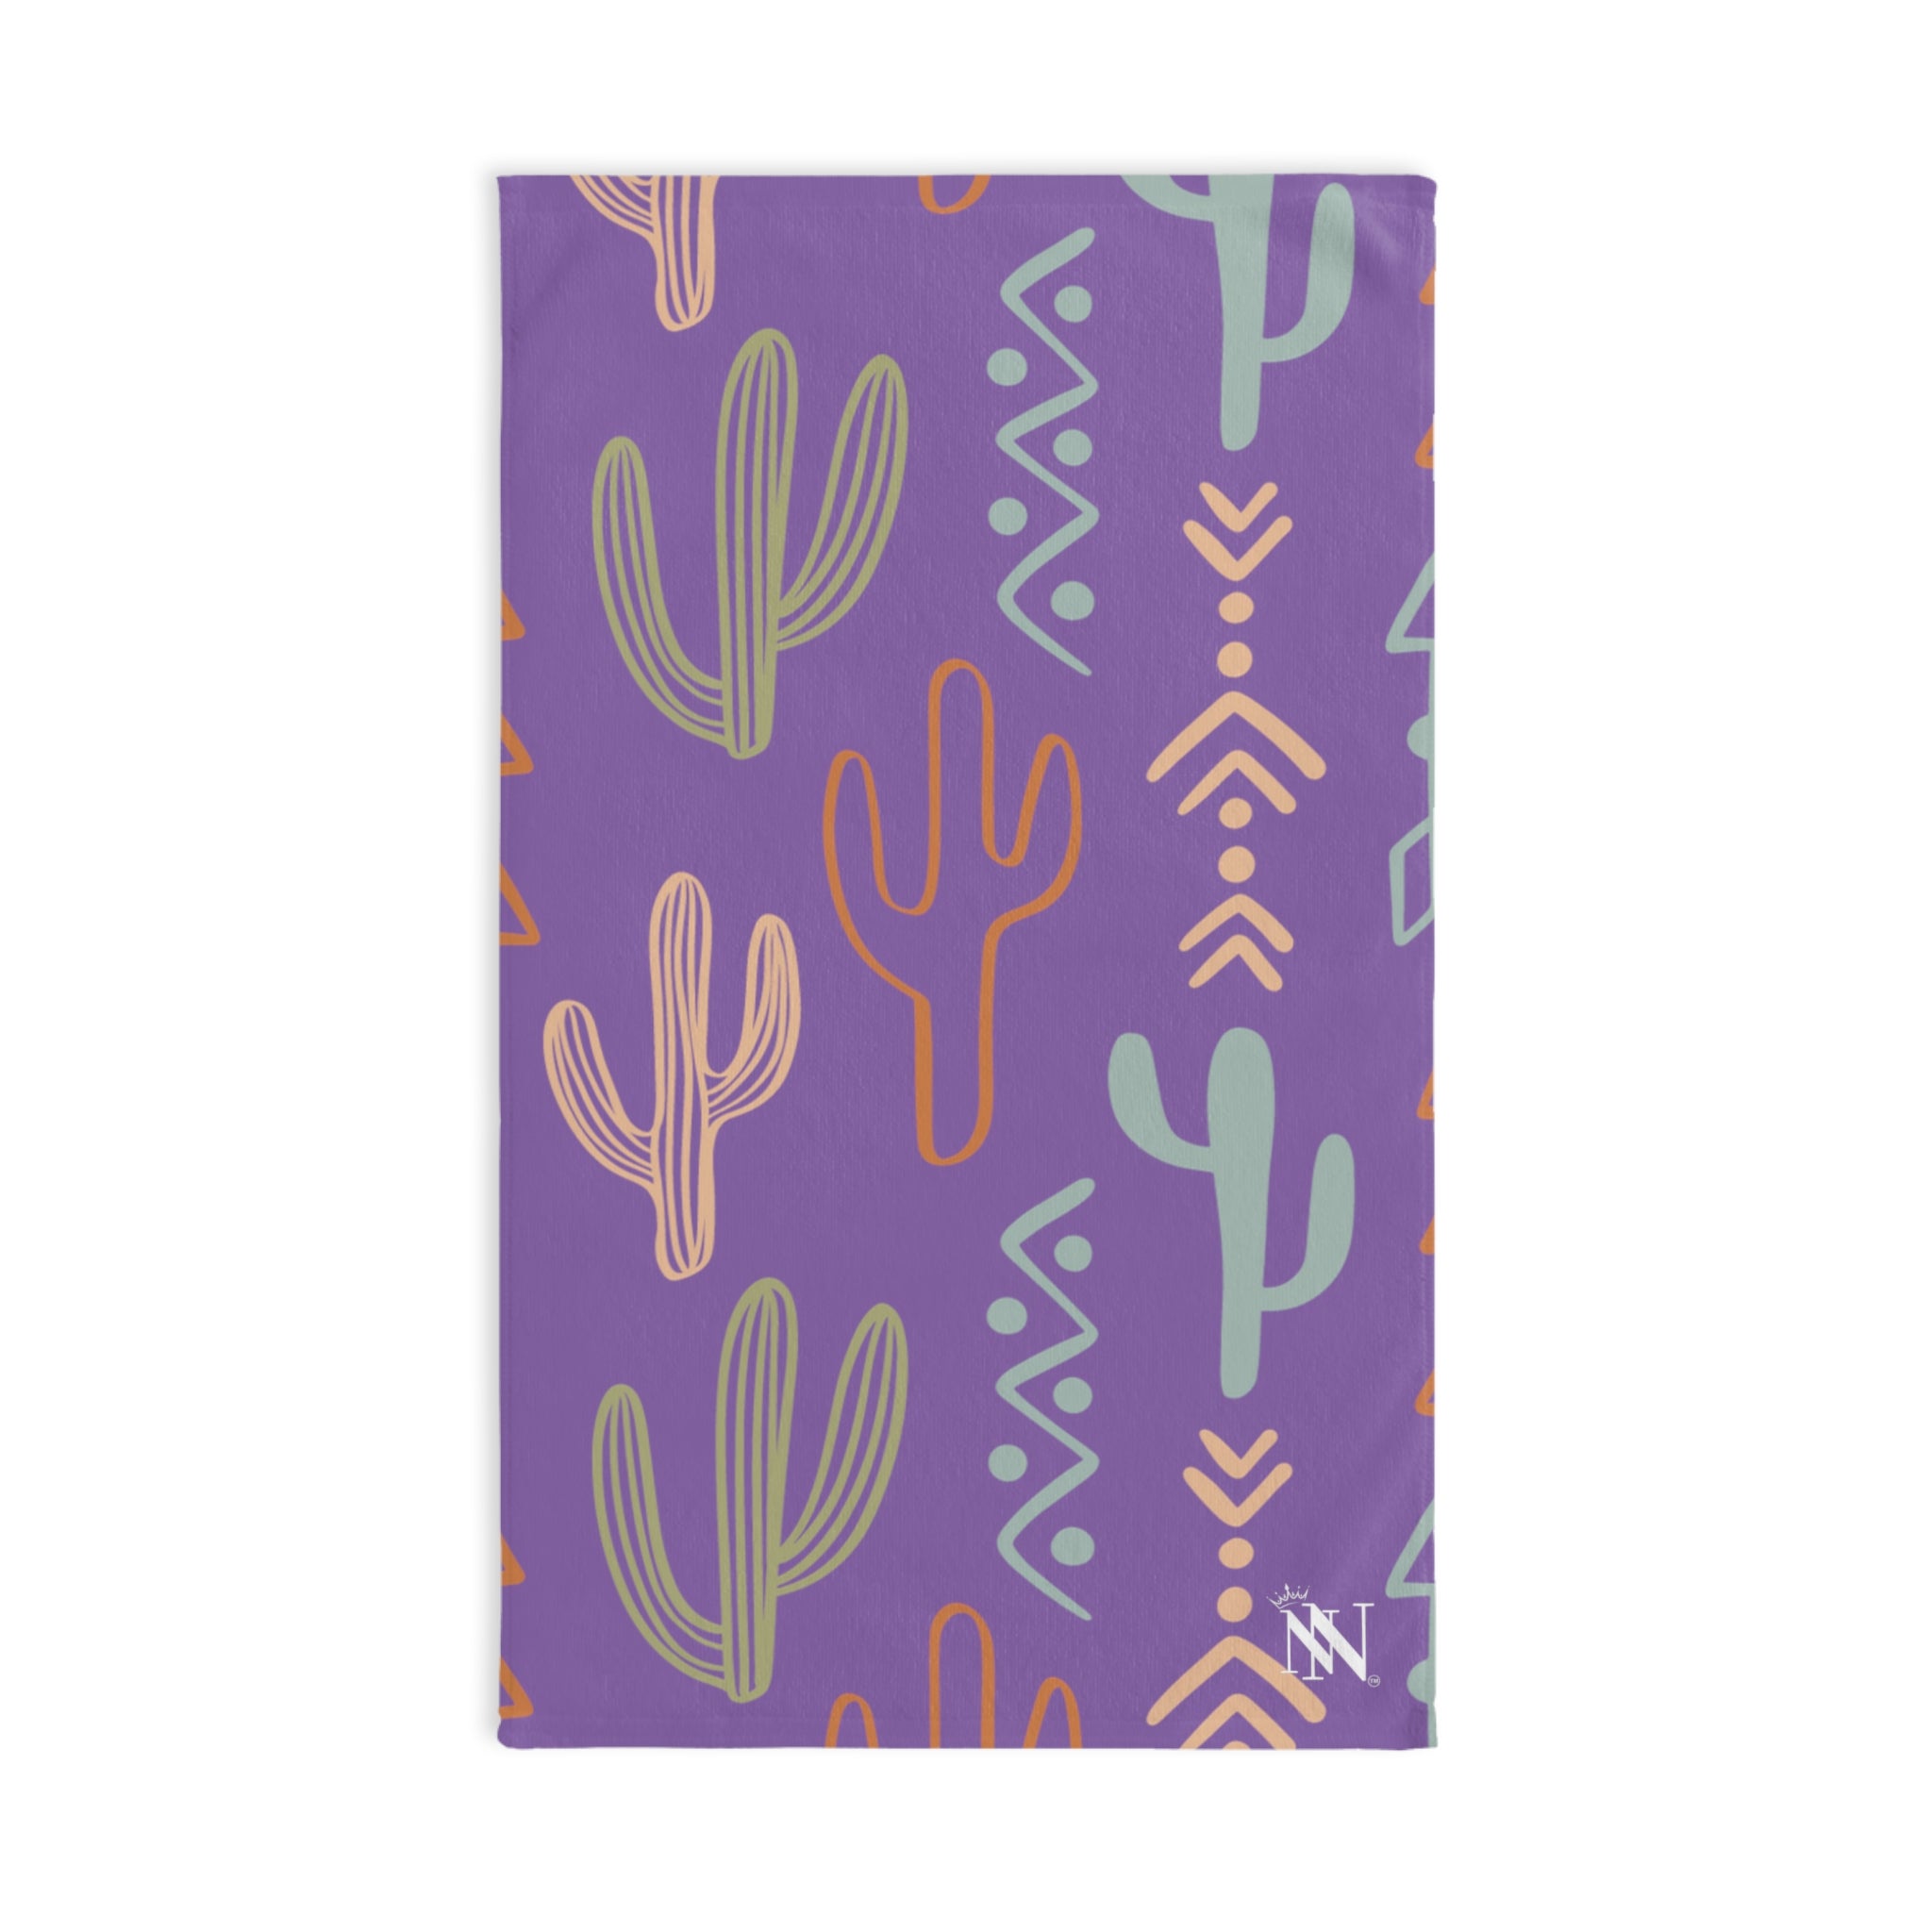 Cactus Western Lavendar | Funny Gifts for Men - Gifts for Him - Birthday Gifts for Men, Him, Husband, Boyfriend, New Couple Gifts, Fathers & Valentines Day Gifts, Hand Towels NECTAR NAPKINS